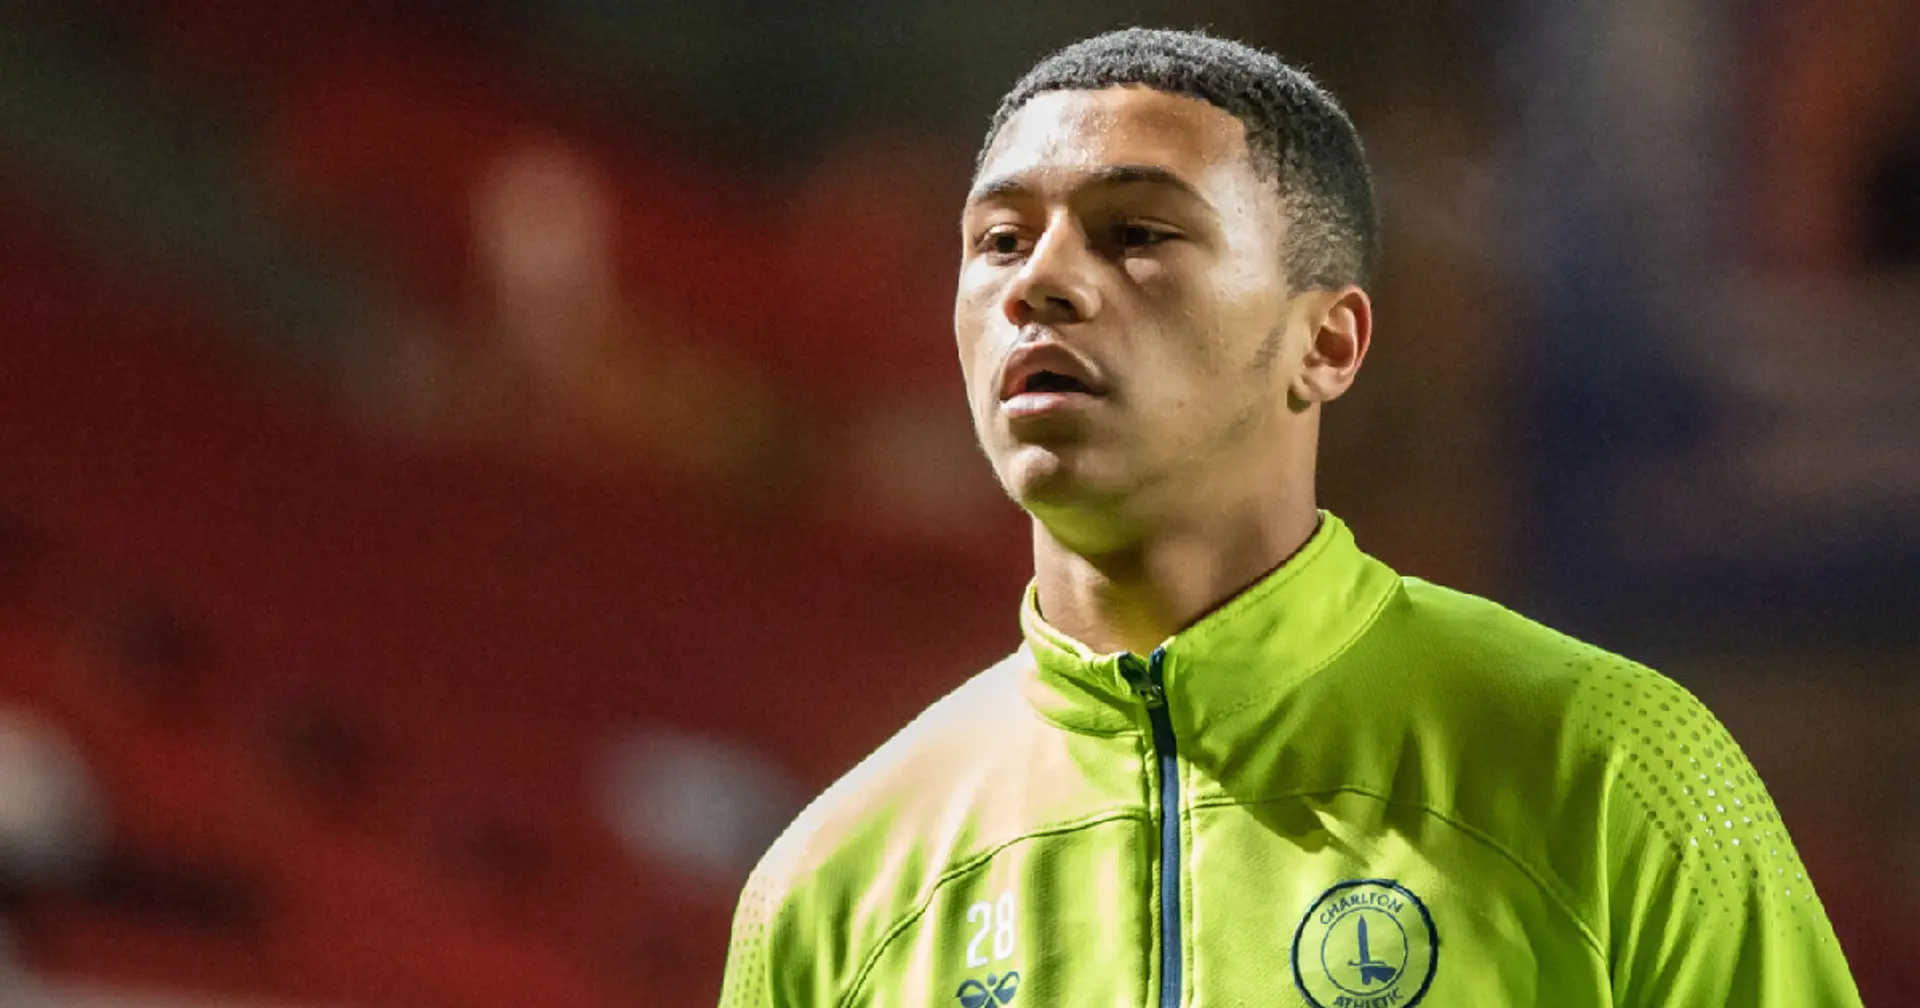 Charlton boss confirms Chelsea will sign 18-year-old striker Burstow